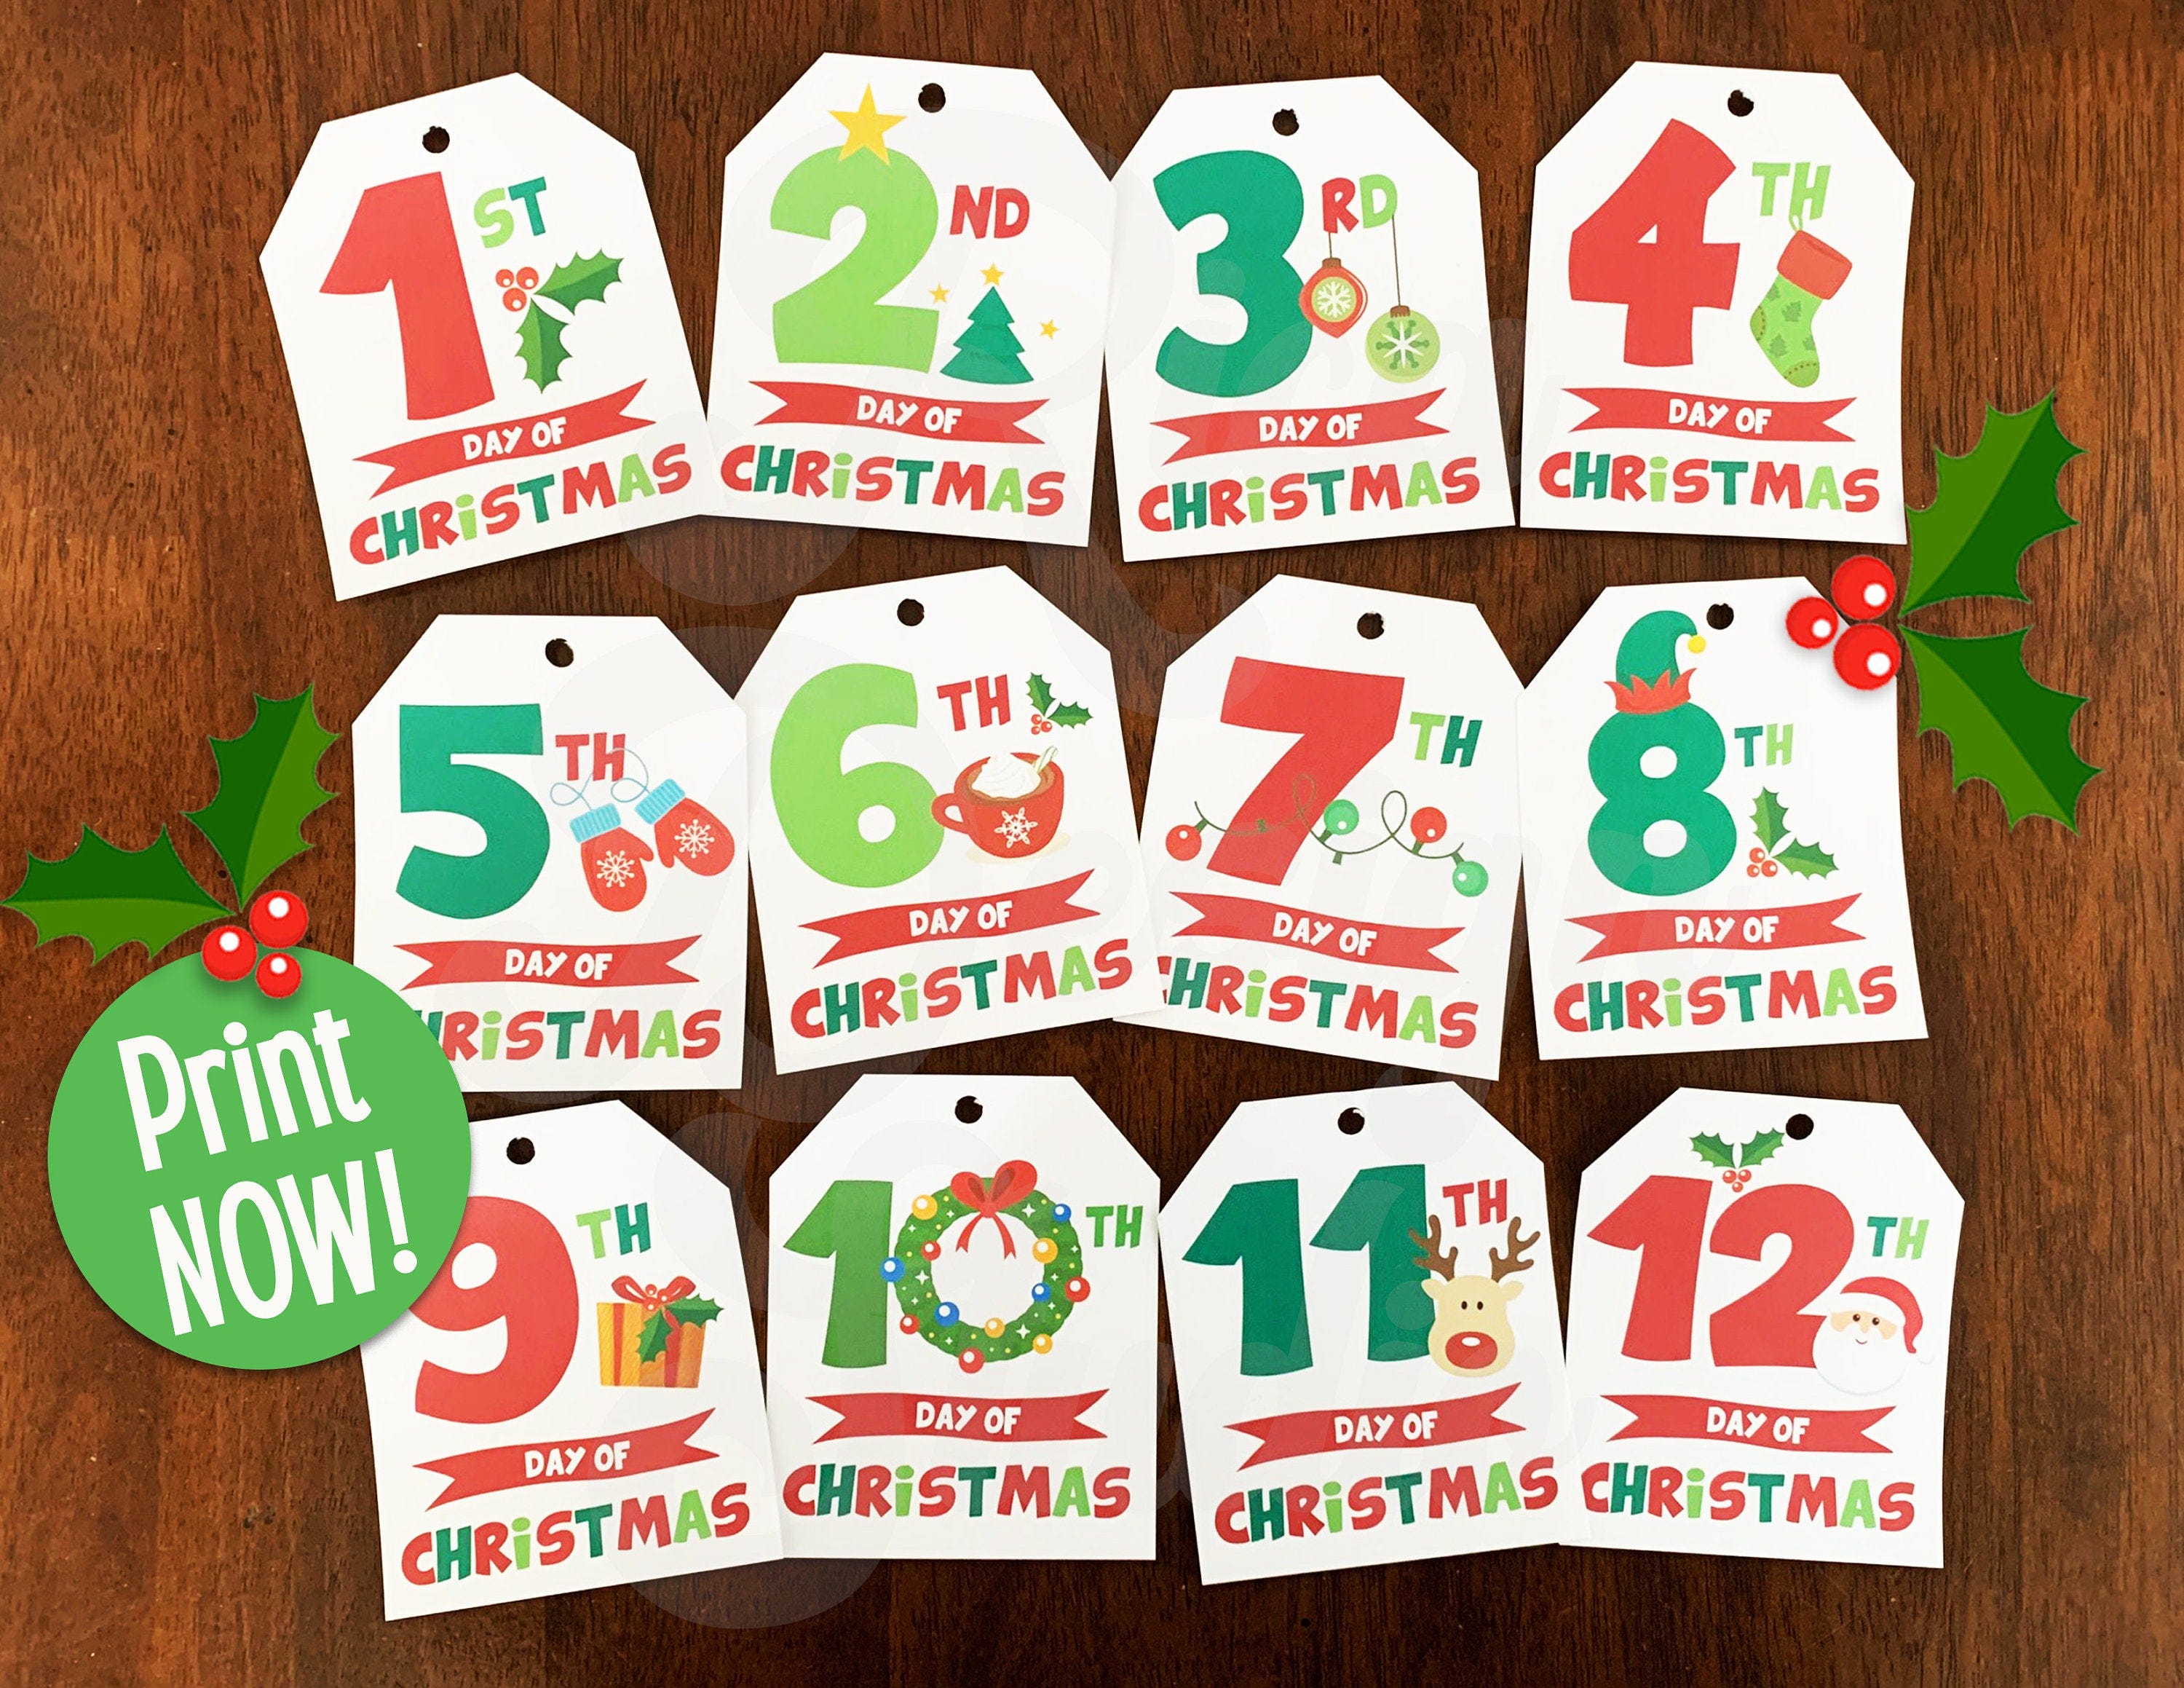 12 Days of Christmas Printable Gift Tags - Twelve Days of Christmas - Kids Treats, Party favors Instant Download PDF